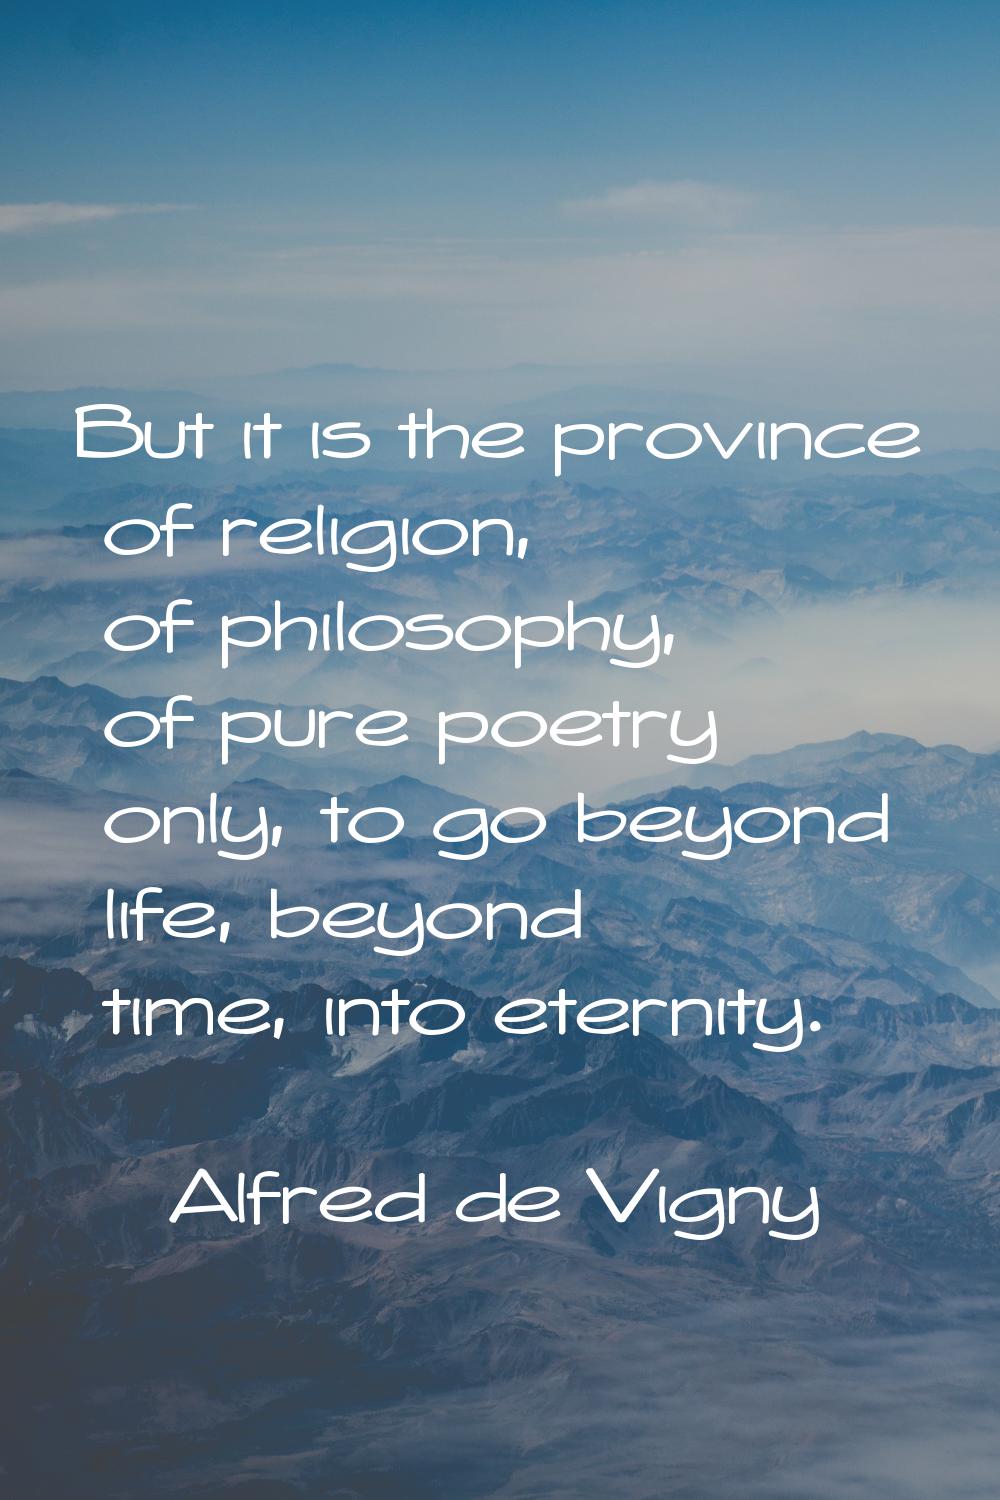 But it is the province of religion, of philosophy, of pure poetry only, to go beyond life, beyond t